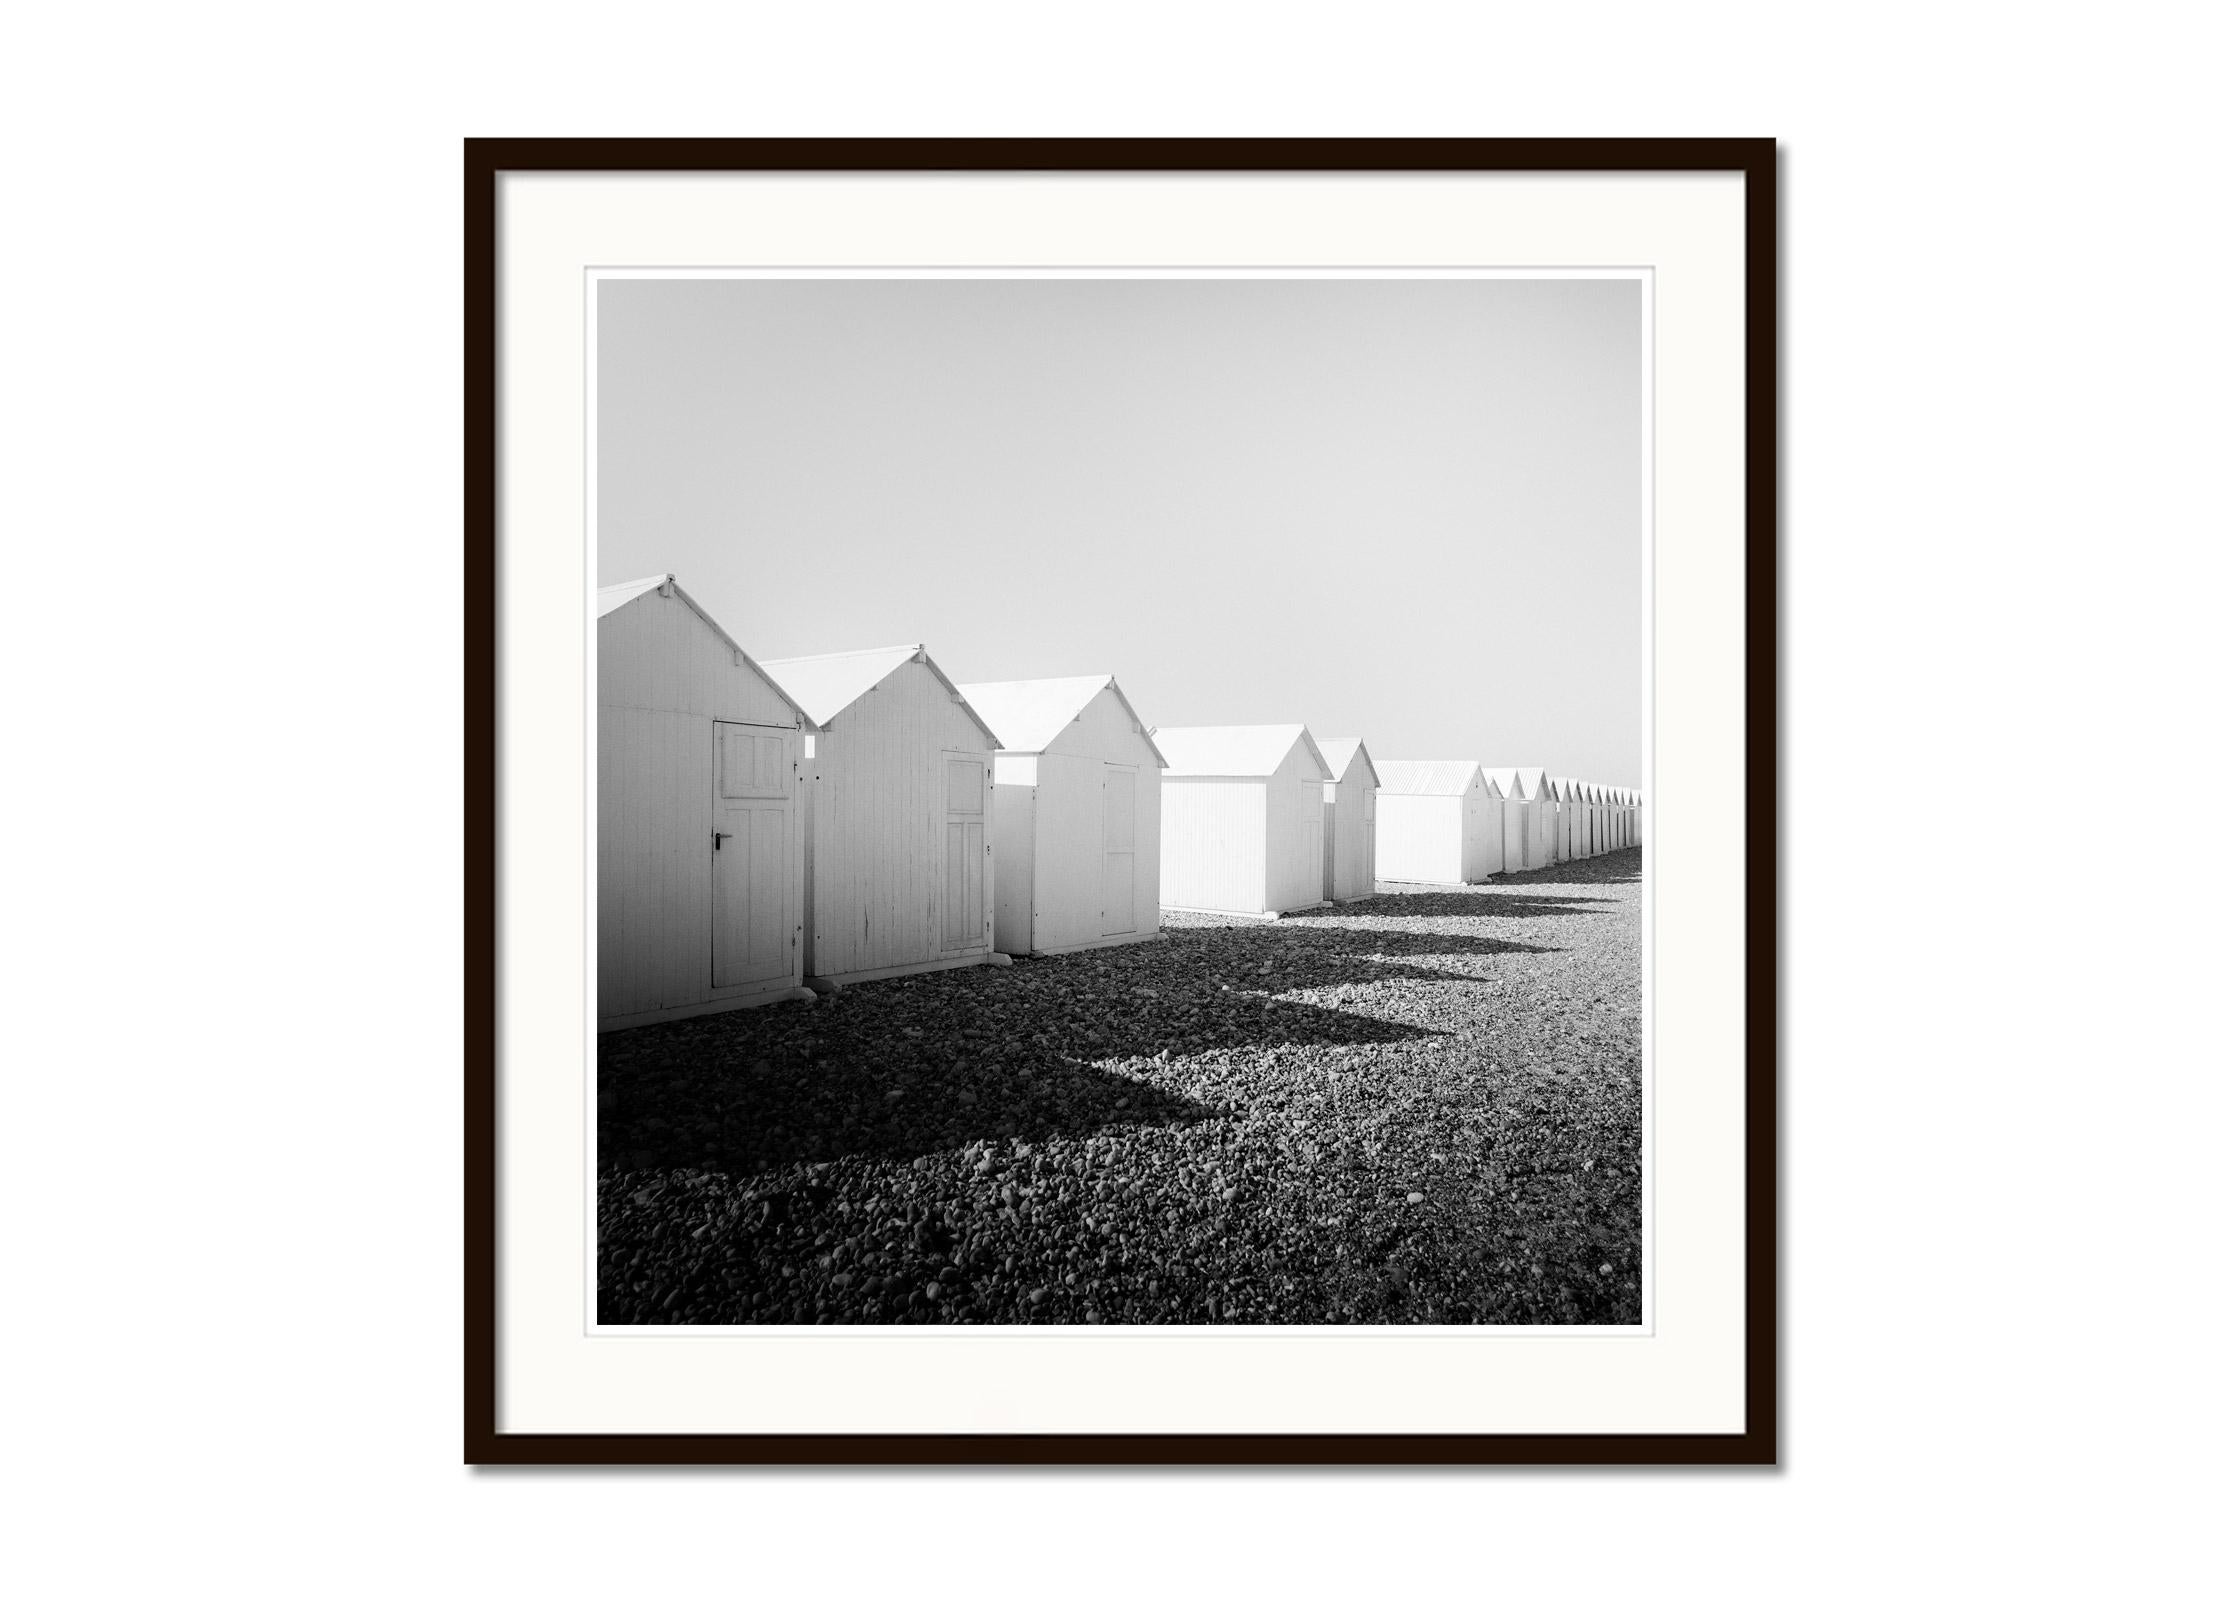 Row of Beach Huts, rocky beach, black and white, fine art, landscape photography - Gray Landscape Photograph by Gerald Berghammer